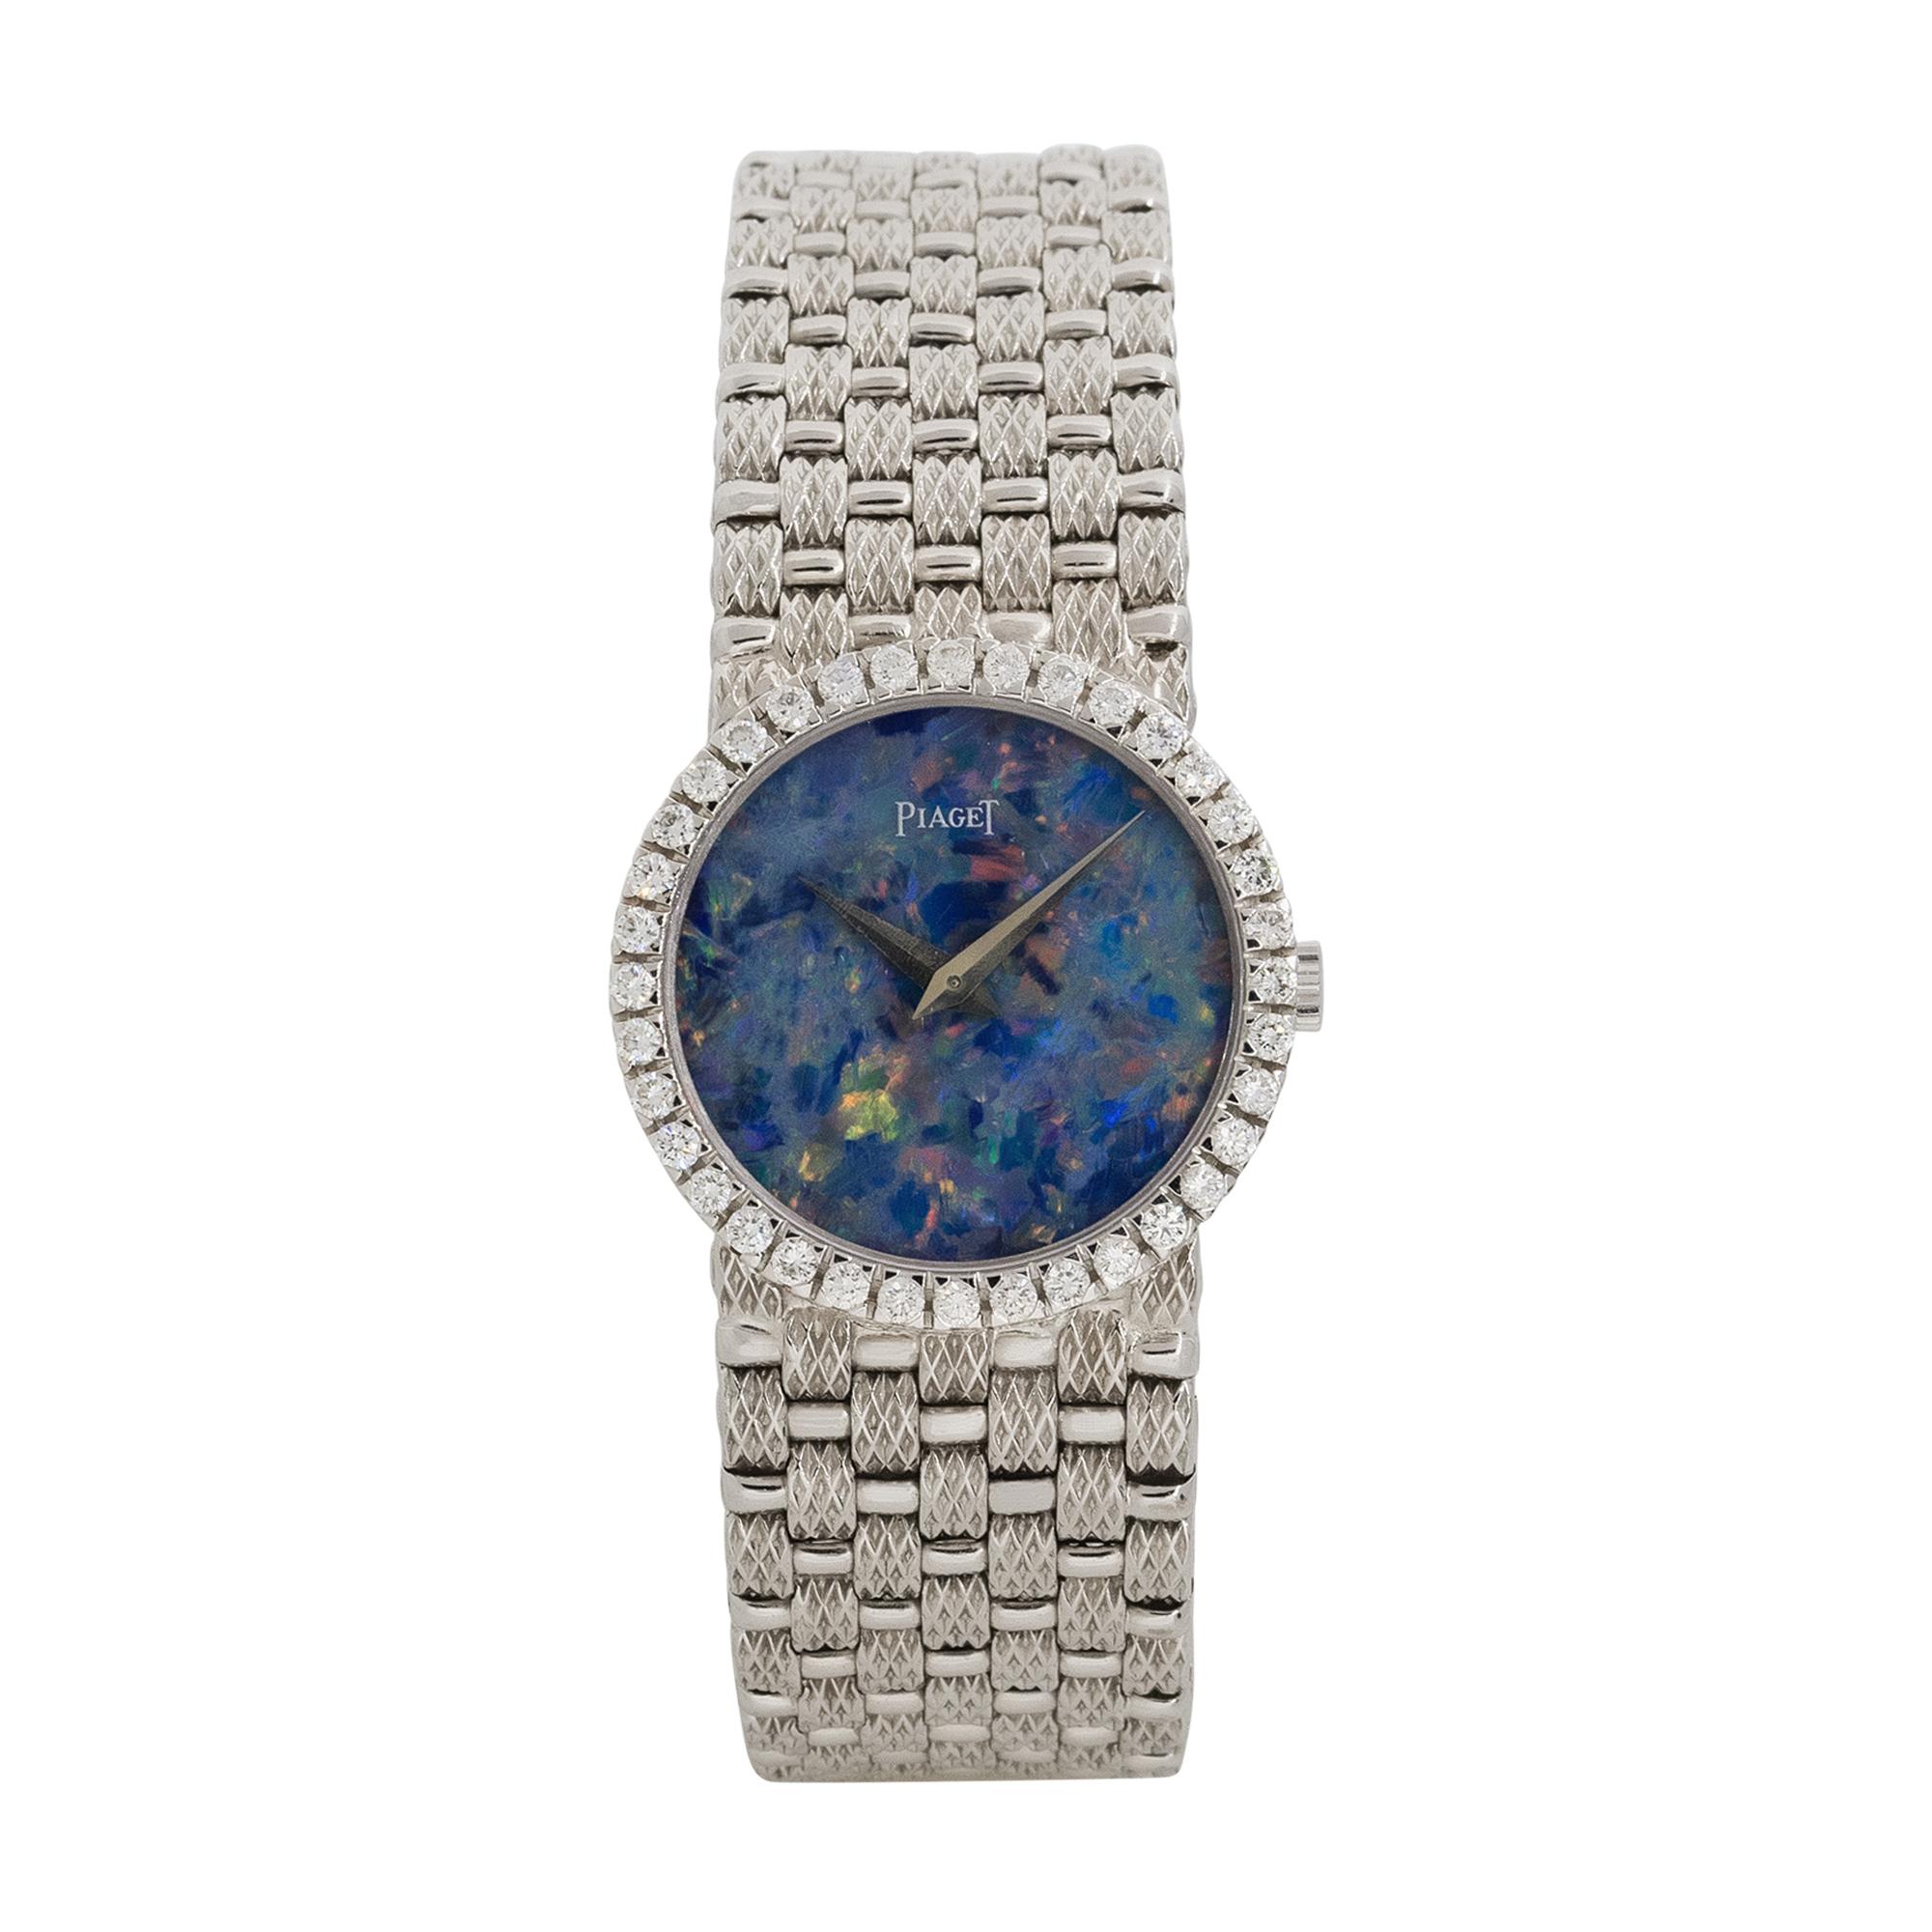 Brand: Piaget
Case Material: 18k White Gold
Case Diameter: 24mm
Crystal: Sapphire Crystal
Bezel: 18k white gold Diamond bezel
Dial: Opal dial with silver hands
Bracelet: 18k White Gold bracelet
Size	Will fit a 5.5